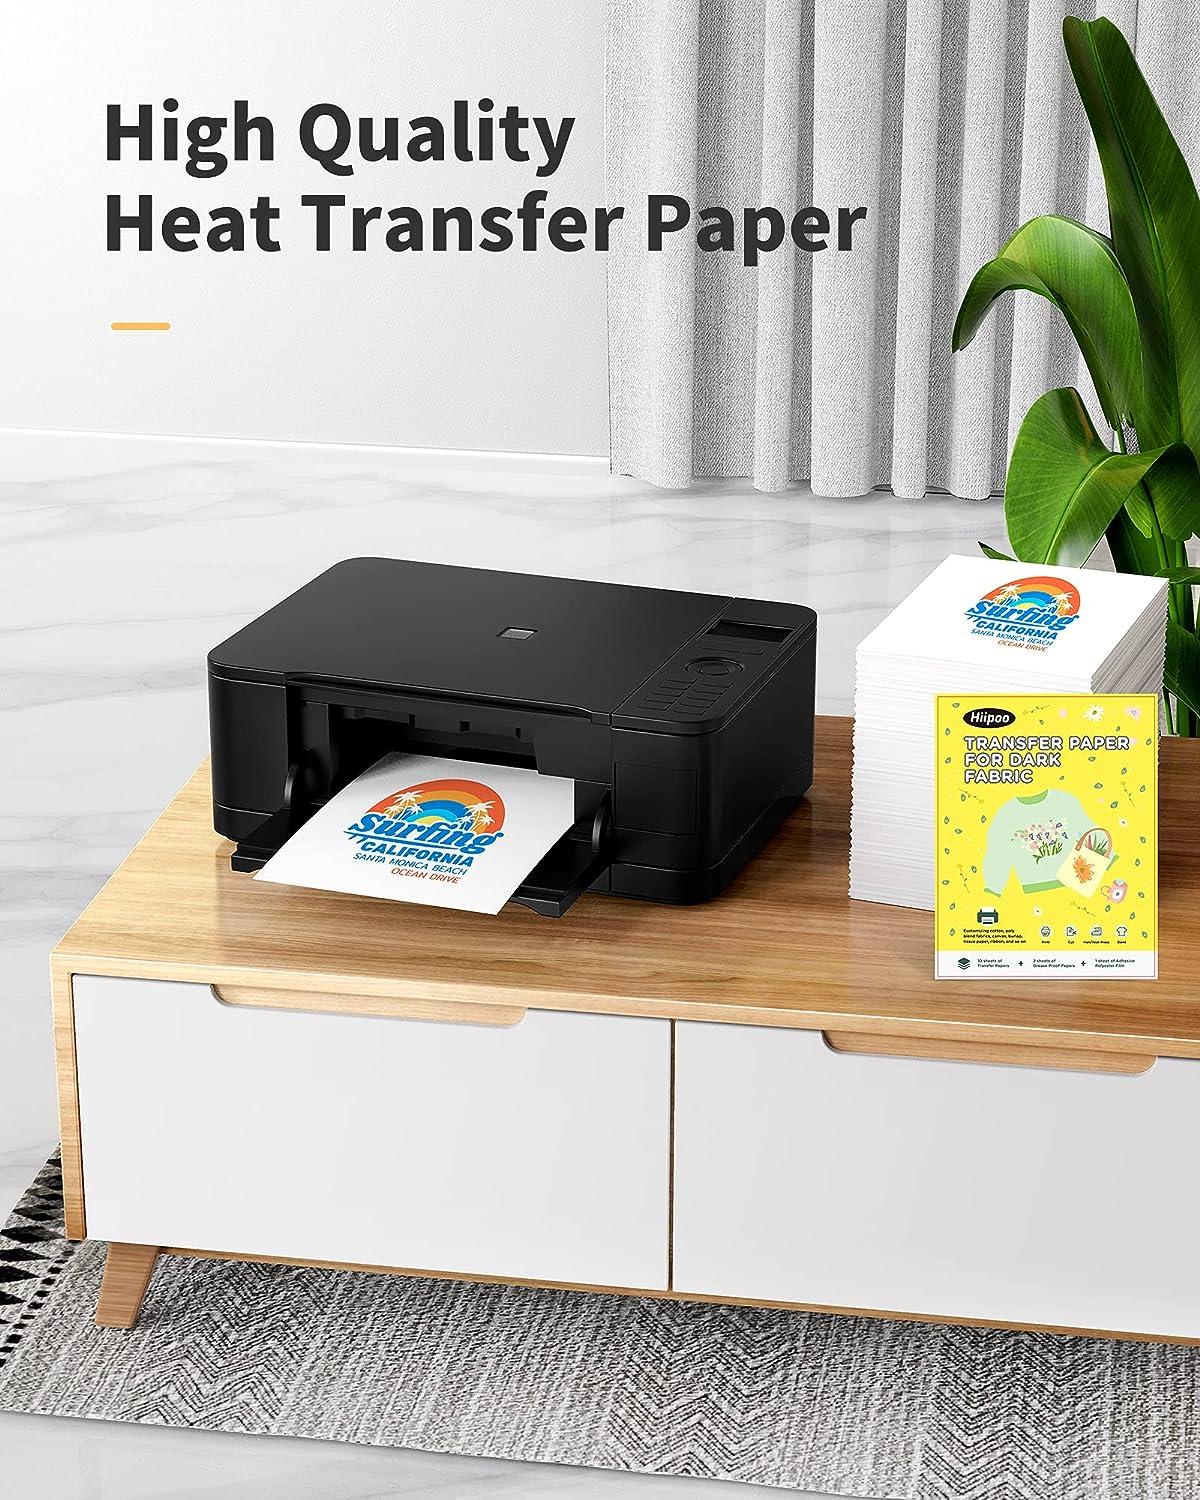  Multifunction Thermal Transfer Paper, Iron on Heat